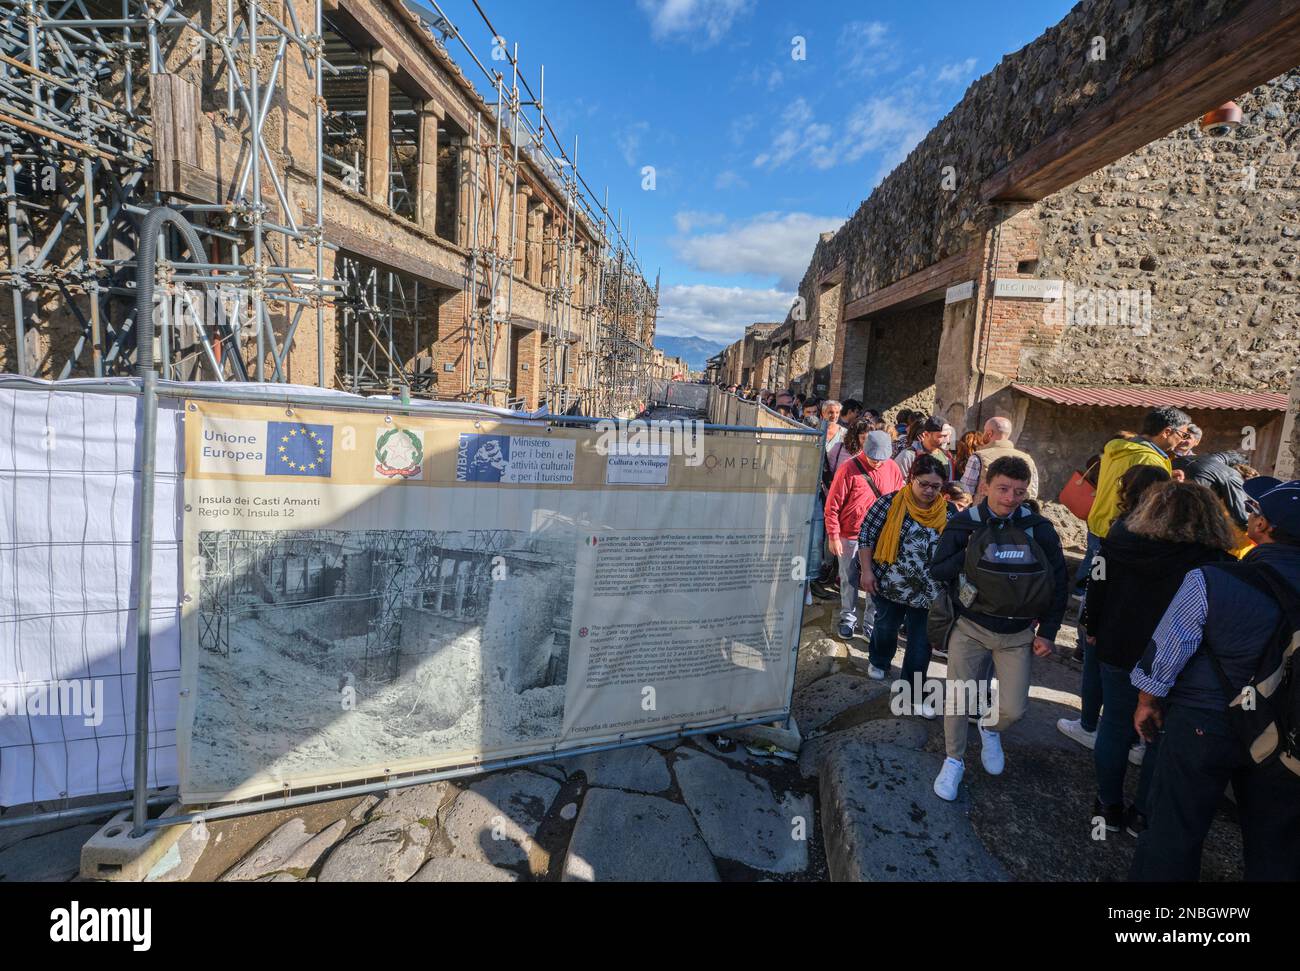 Preservation, restoration work with metal scaffolding being done at a two story villa building. Tourists are stuck traversing a small area. At Pompeii Stock Photo